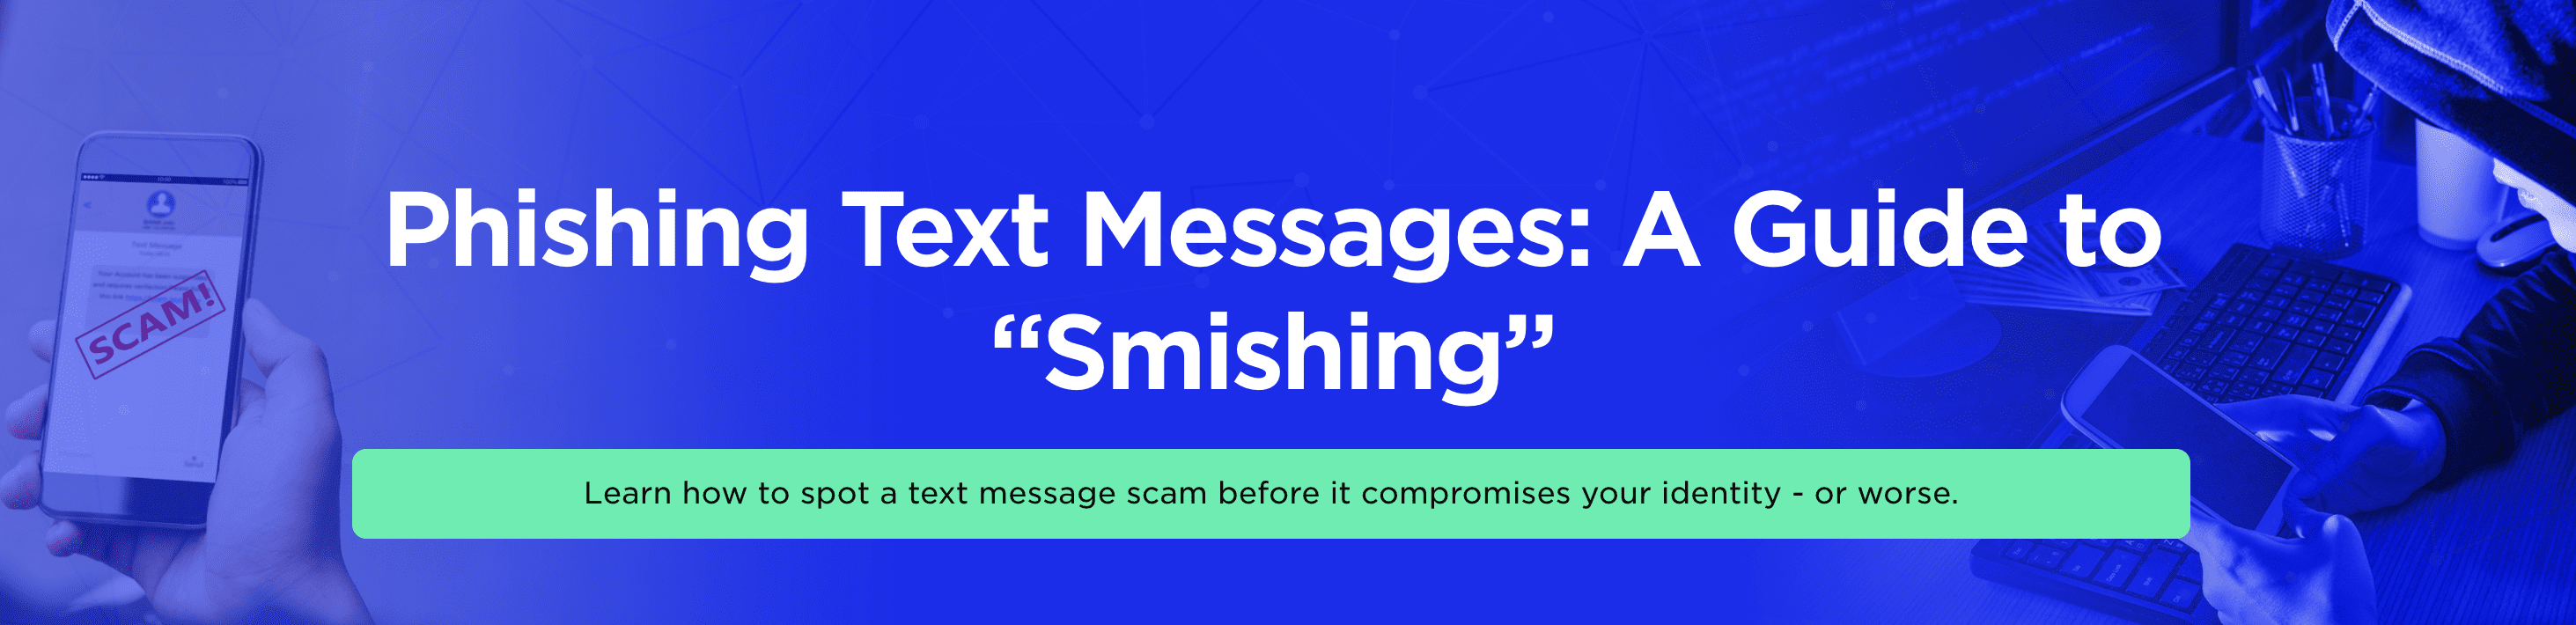 Phishing Text Messages: A Guide to “Smishing”